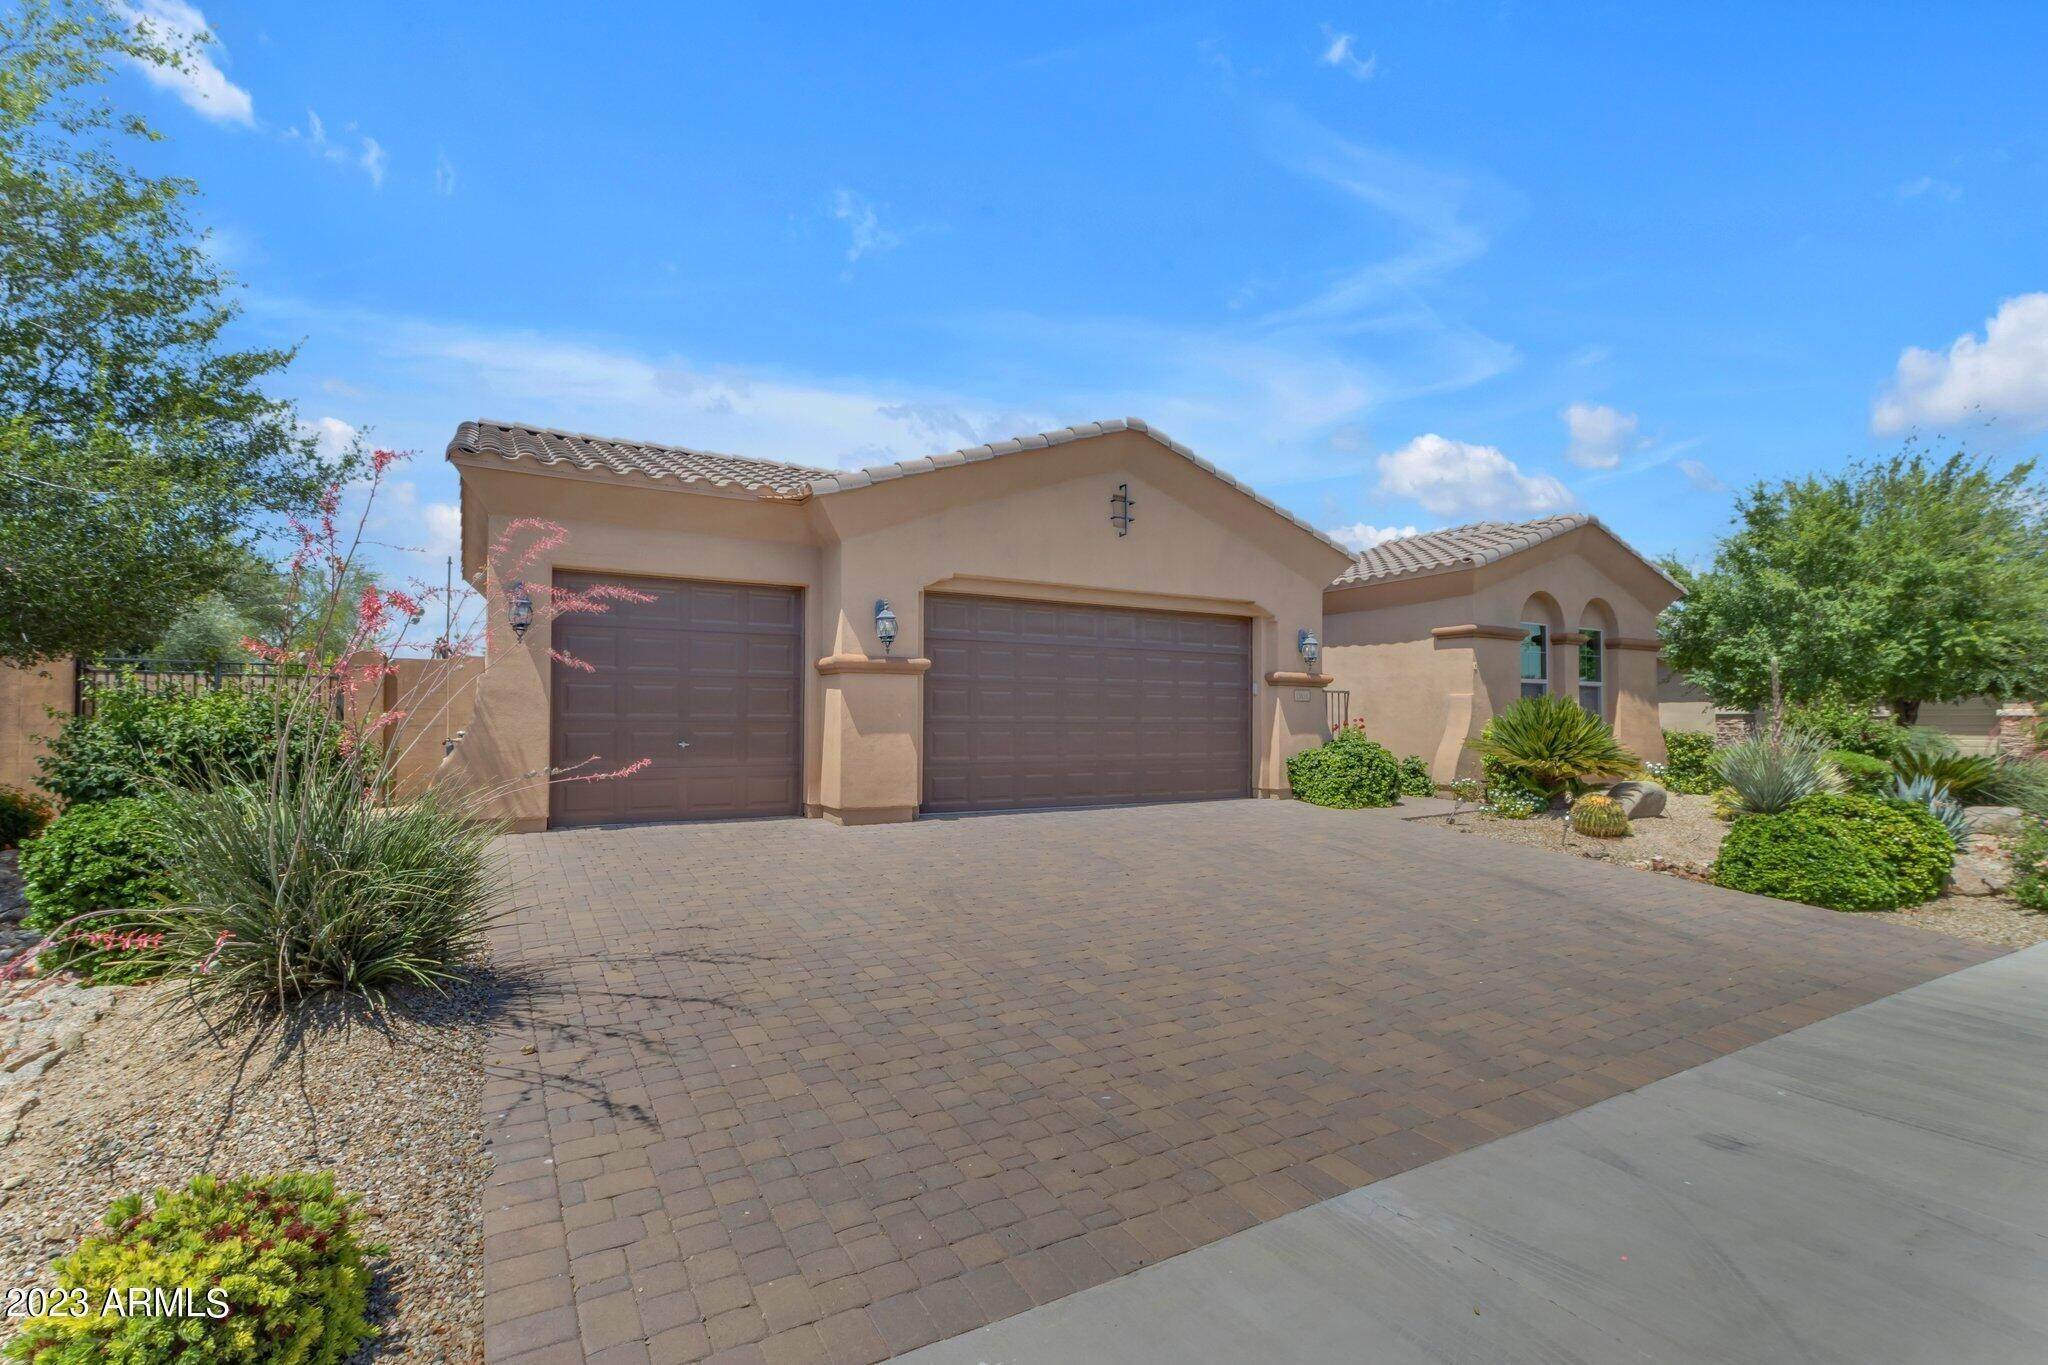 39. Single Family for Sale at Goodyear, AZ 85395